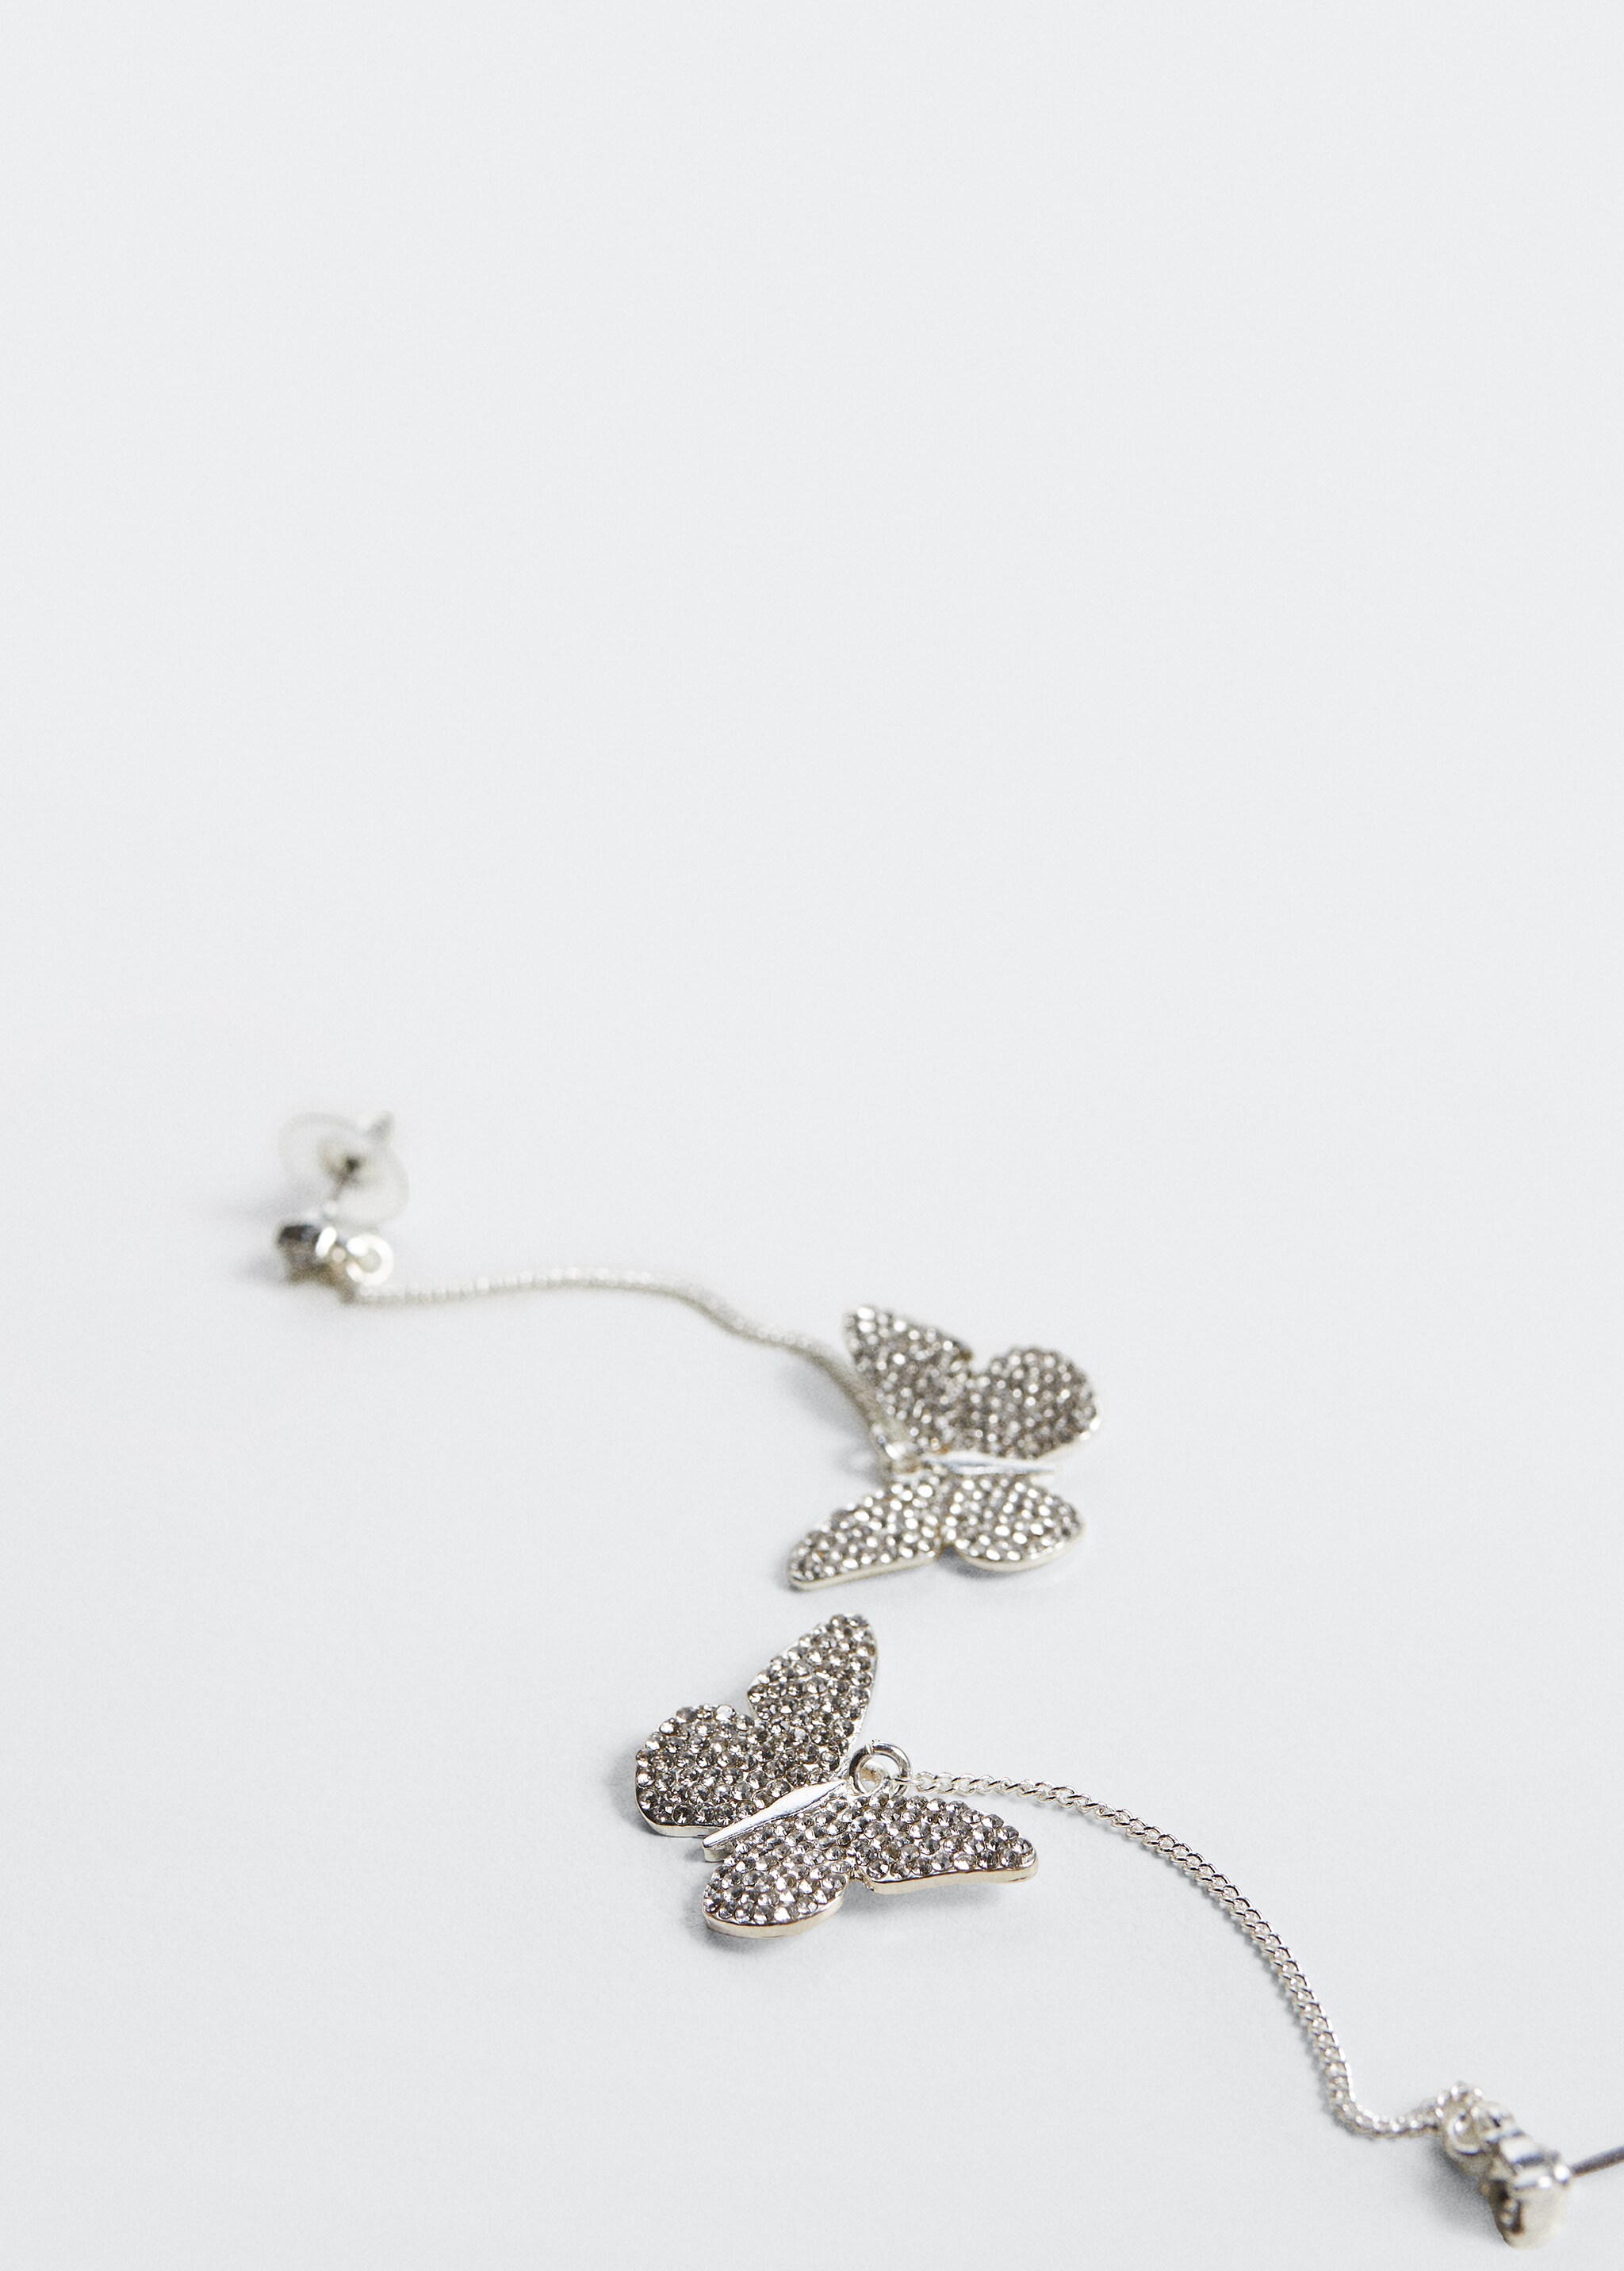 Butterfly earrings - Details of the article 2